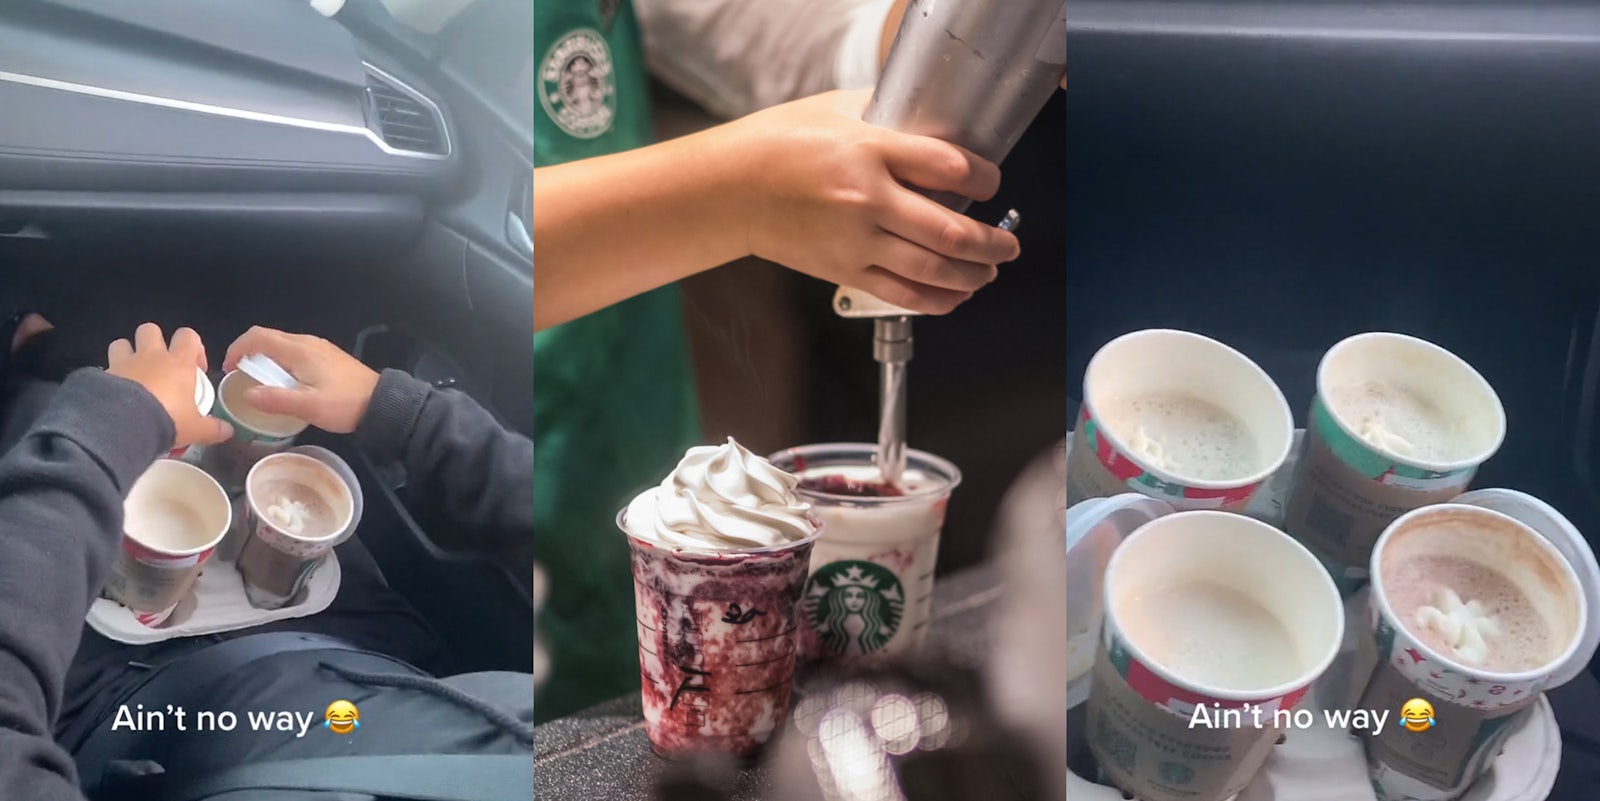 person in car with Starbucks coffee's in drink carrier on lap hands lifting lids caption 'Ain't no way' (l) Starbucks employee filling cups (c) person in car with Starbucks coffee's without lids in drink carrier caption 'Ain't no way' (r)